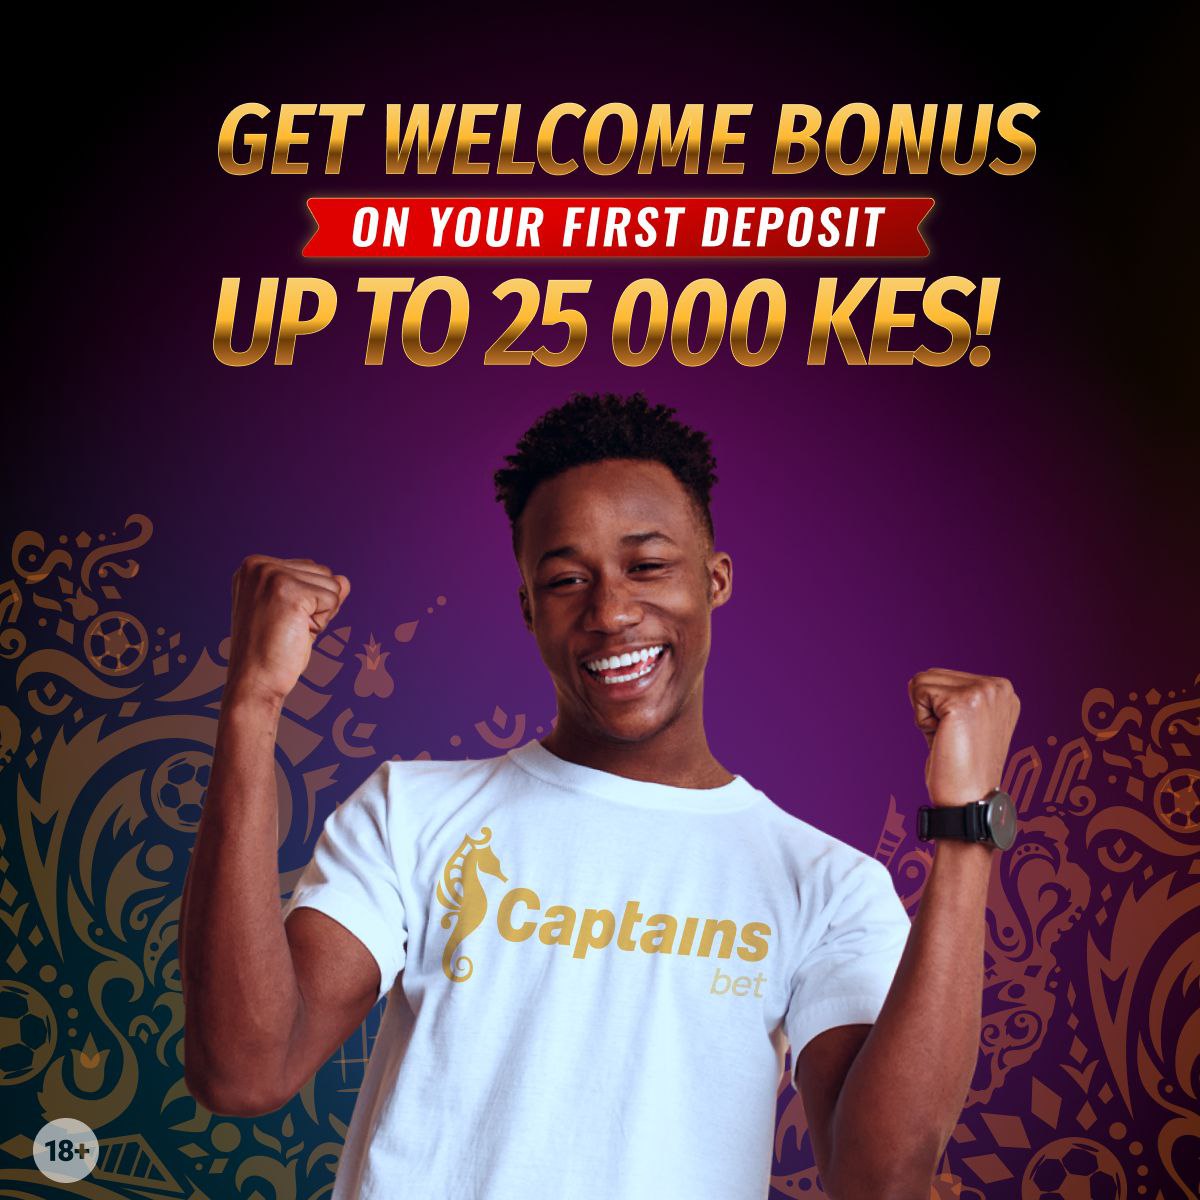 NEED 20 PEOPLE NIWAPEE LUNCH YA 100KSH
SIMPLY REGISTER ACCOUNT Captainsbet
Using👉🏻captainspartners.com/d53fe5d7d
After ur done send ur mpesa Number